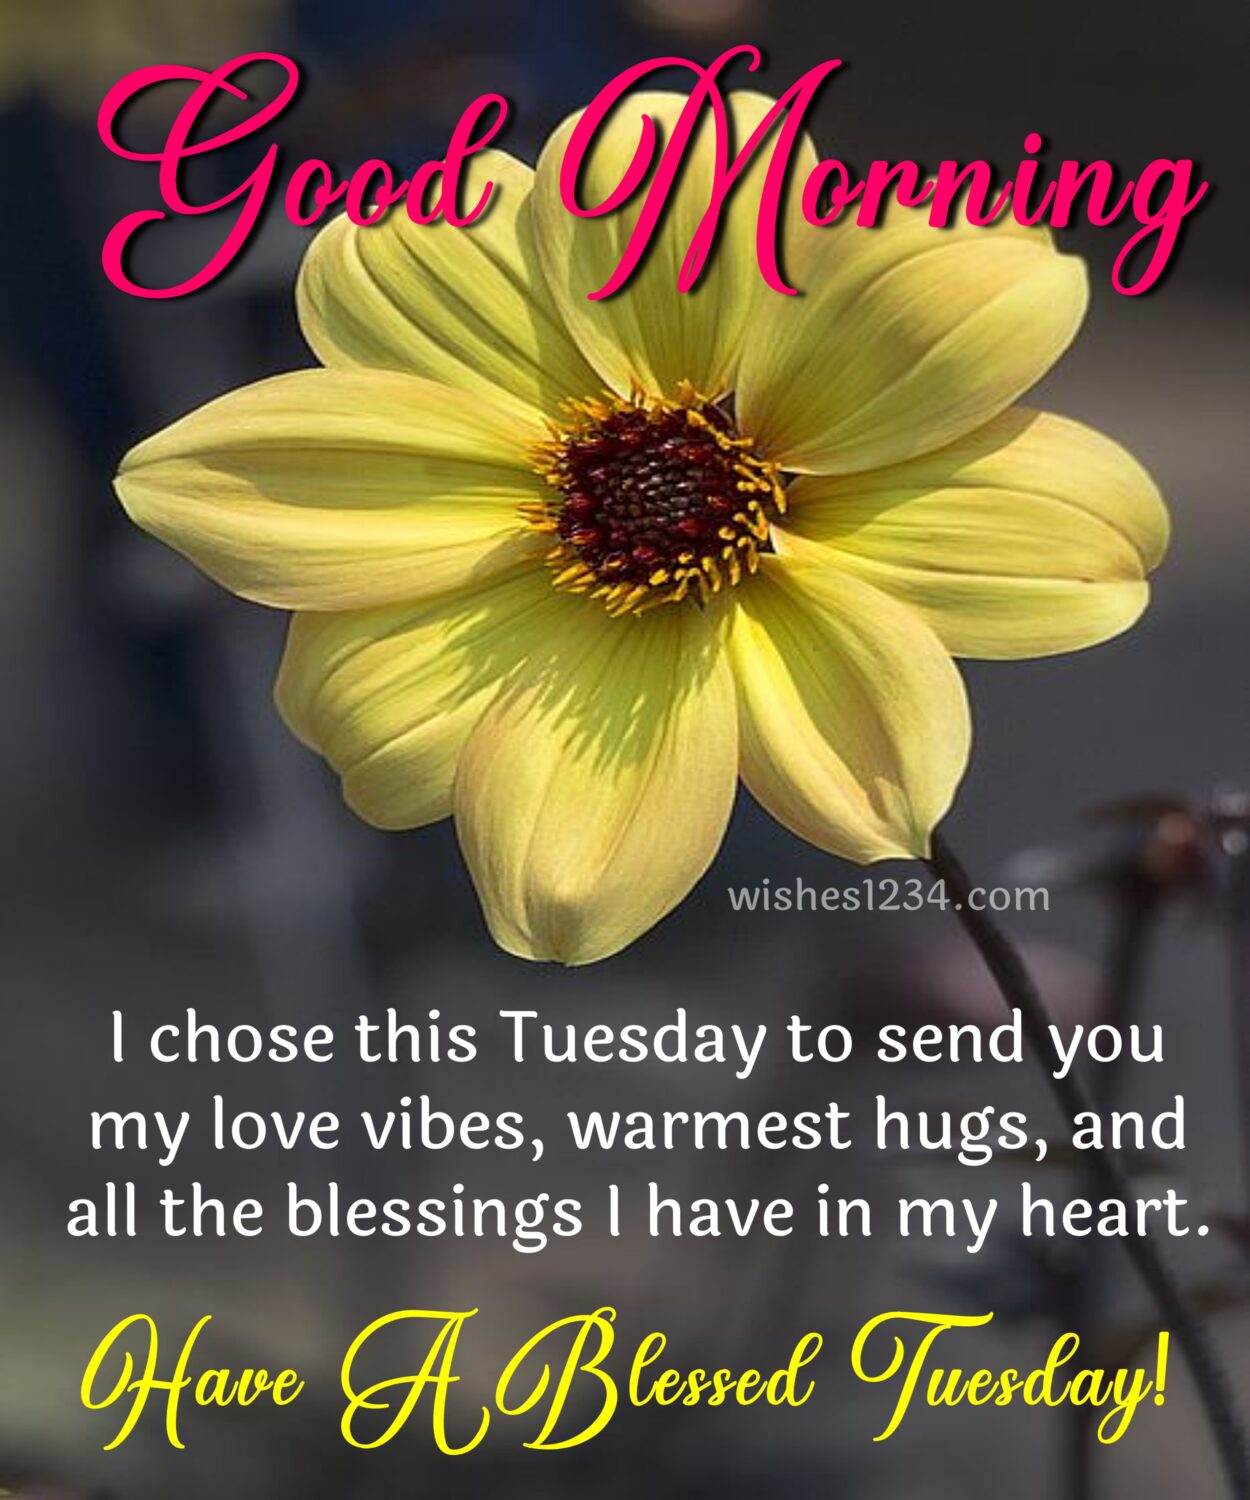 Tuesday blessings with Yellow daisy flower, Happy Tuesday images.